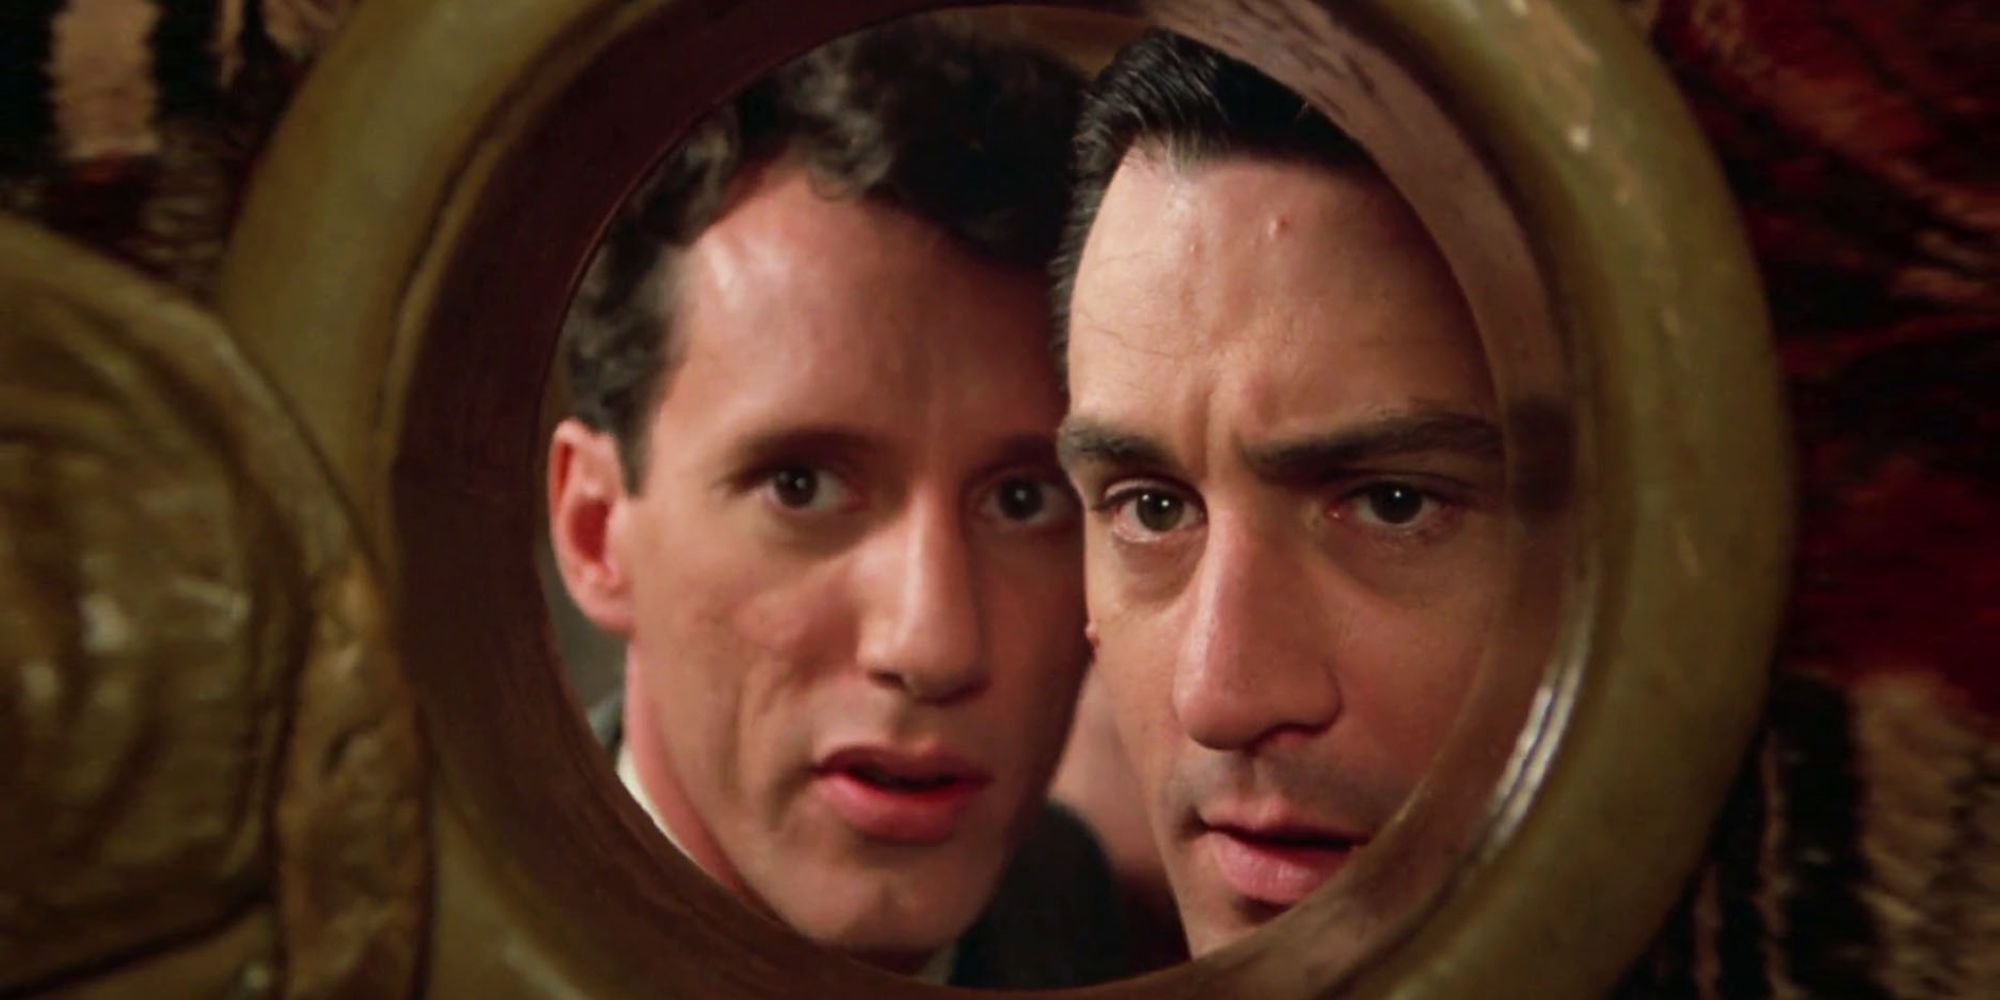 James Woods as Max and Robert De Niro as Noodles in Once Upon a Time in America (1984)